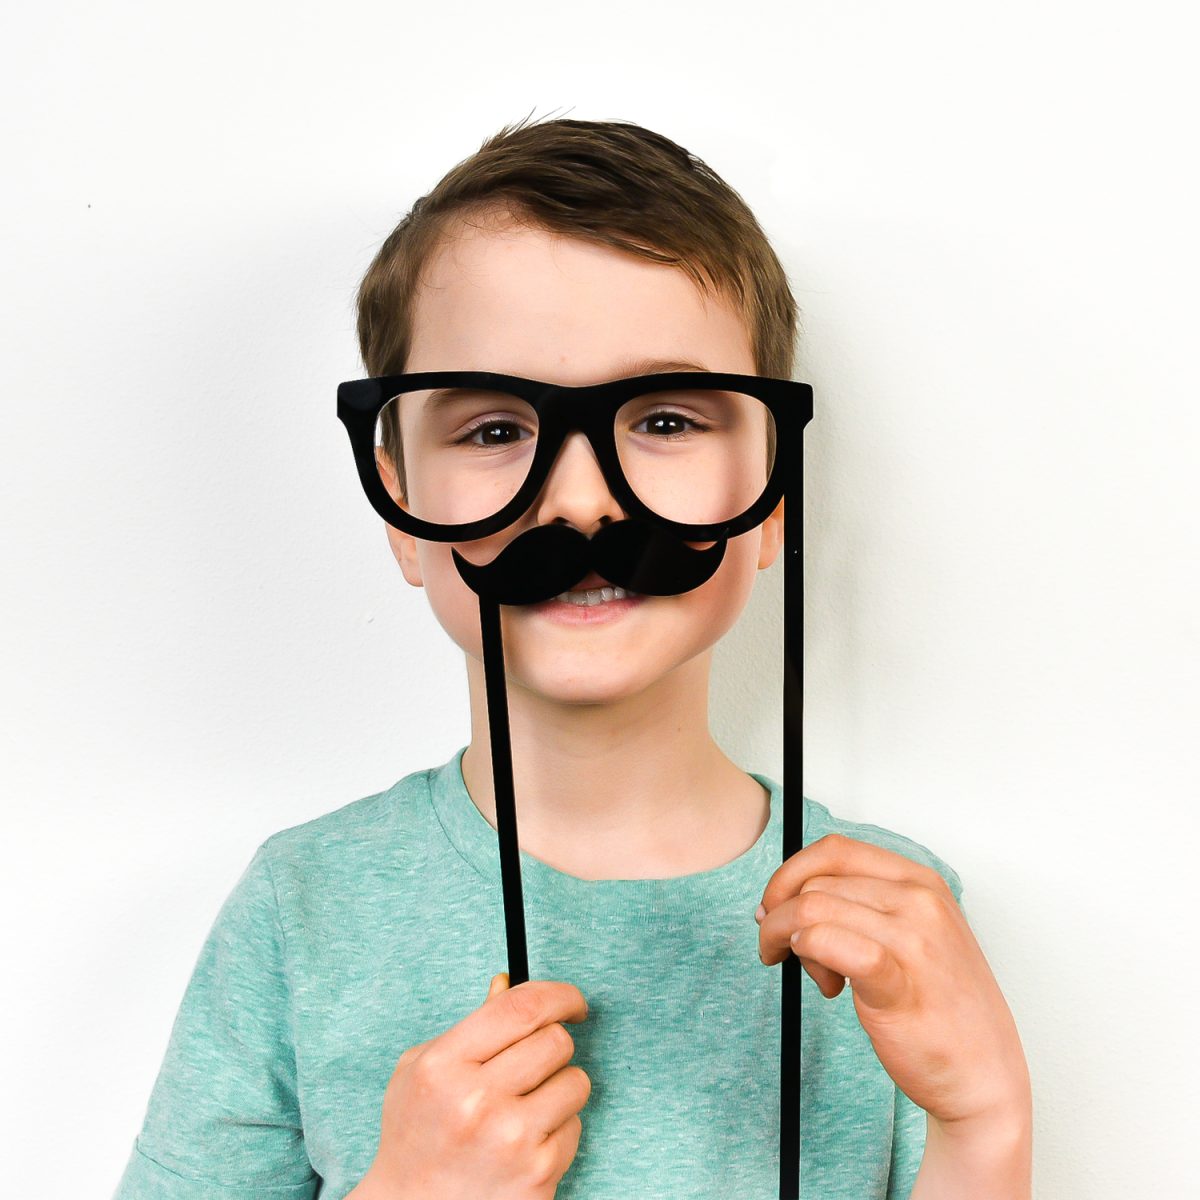 Boy holding mustache and glasses photo props